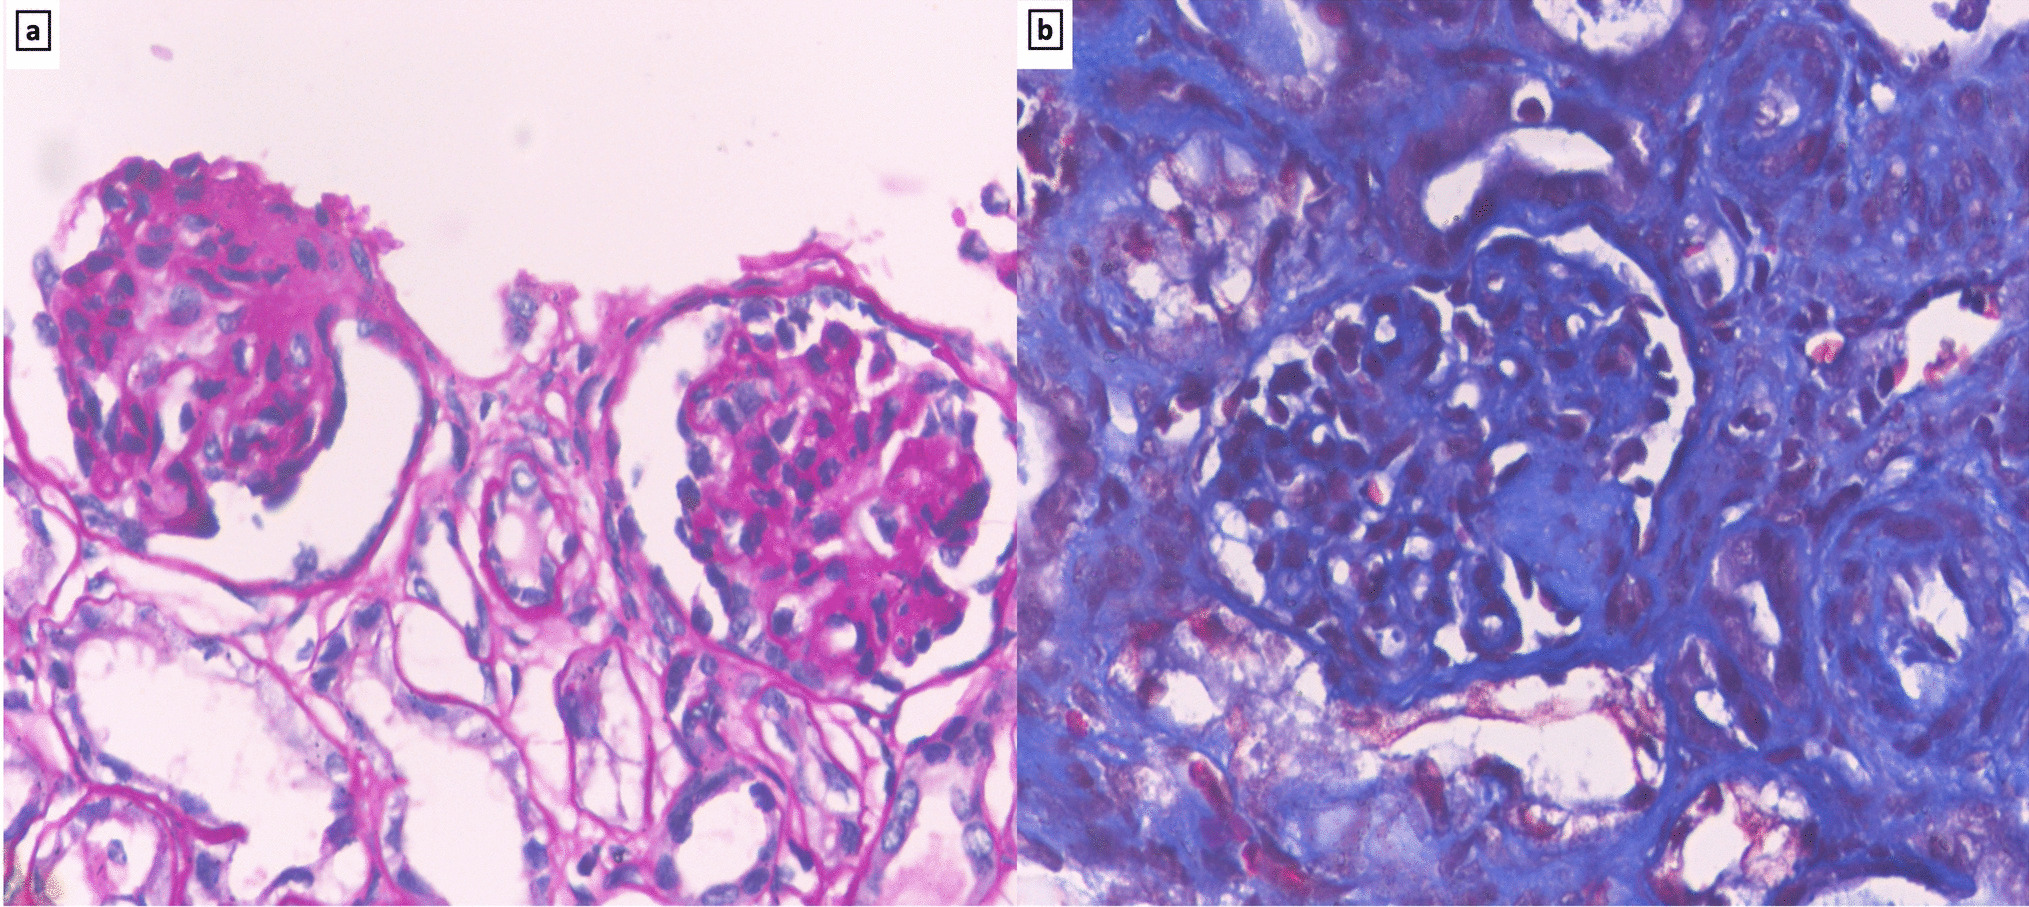 Congenital nephrotic syndrome with diffuse mesangial sclerosis caused by compound heterozygous mutation in LAMA5 gene